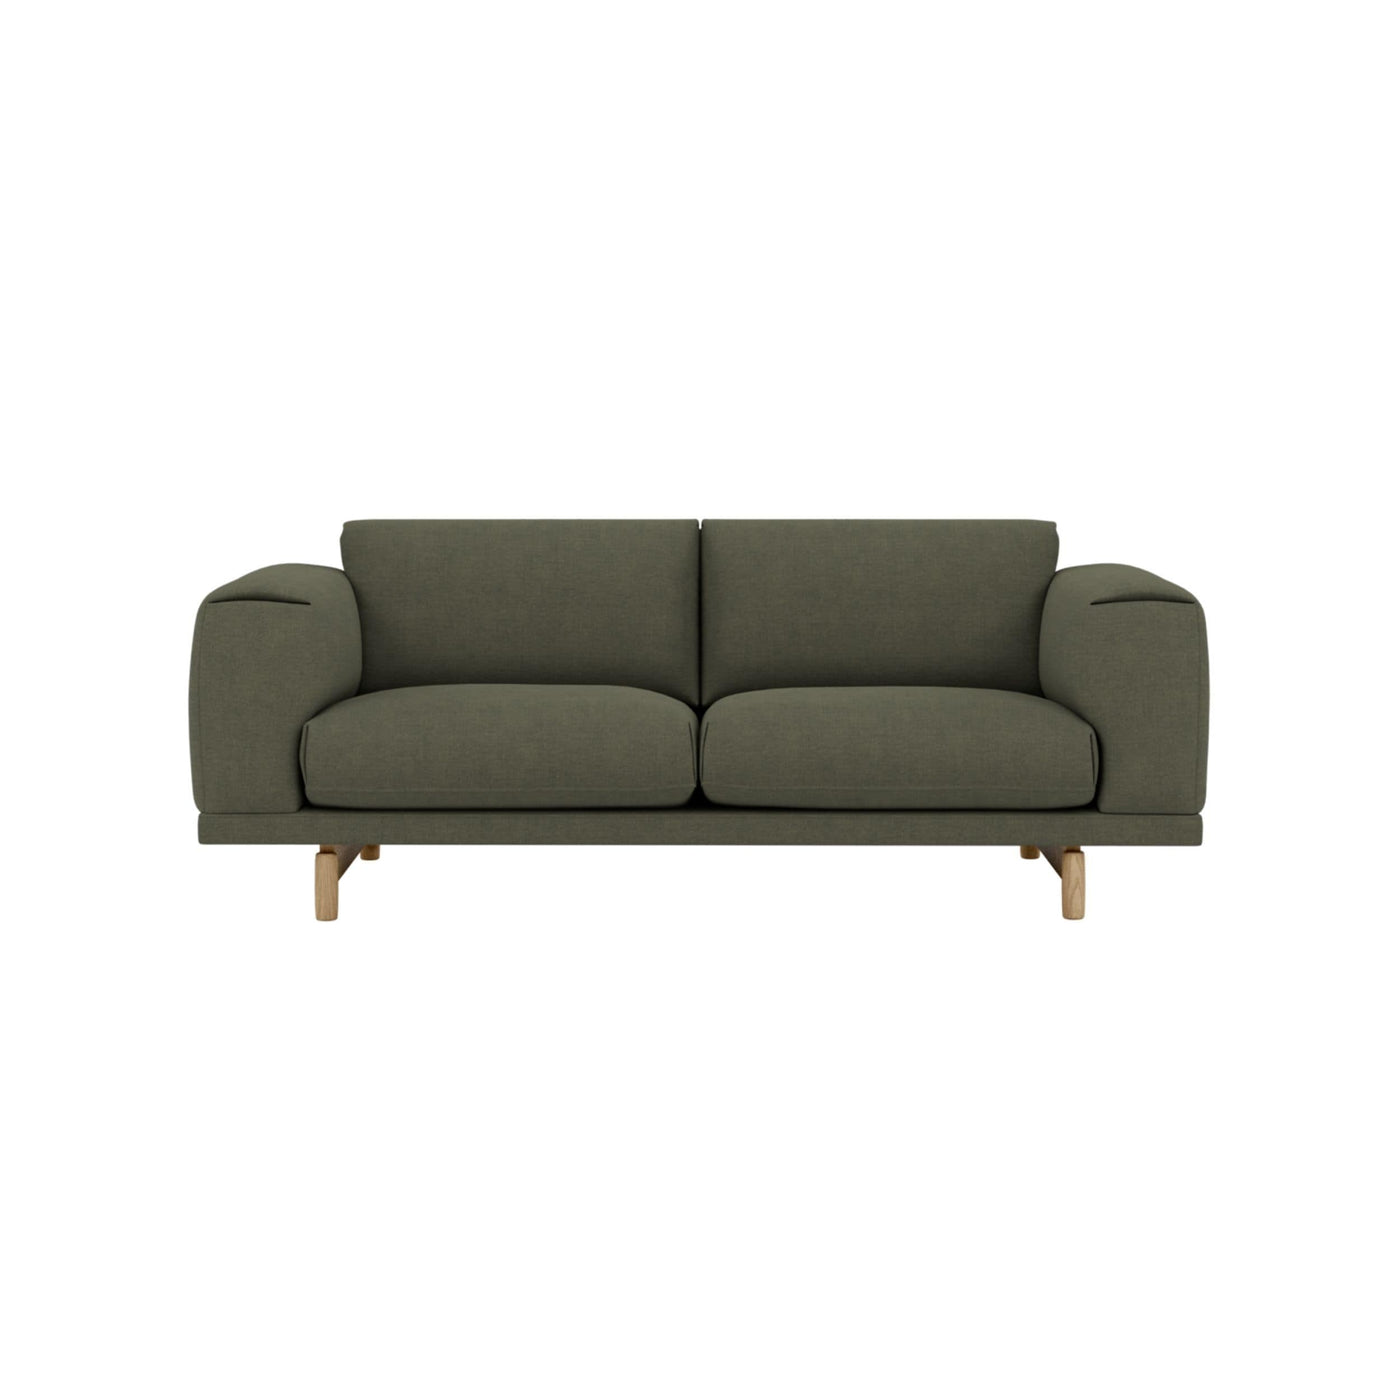 Muuto Rest Sofa in fiord 961 fabric. Made to order from someday designs. #colour_fiord-961